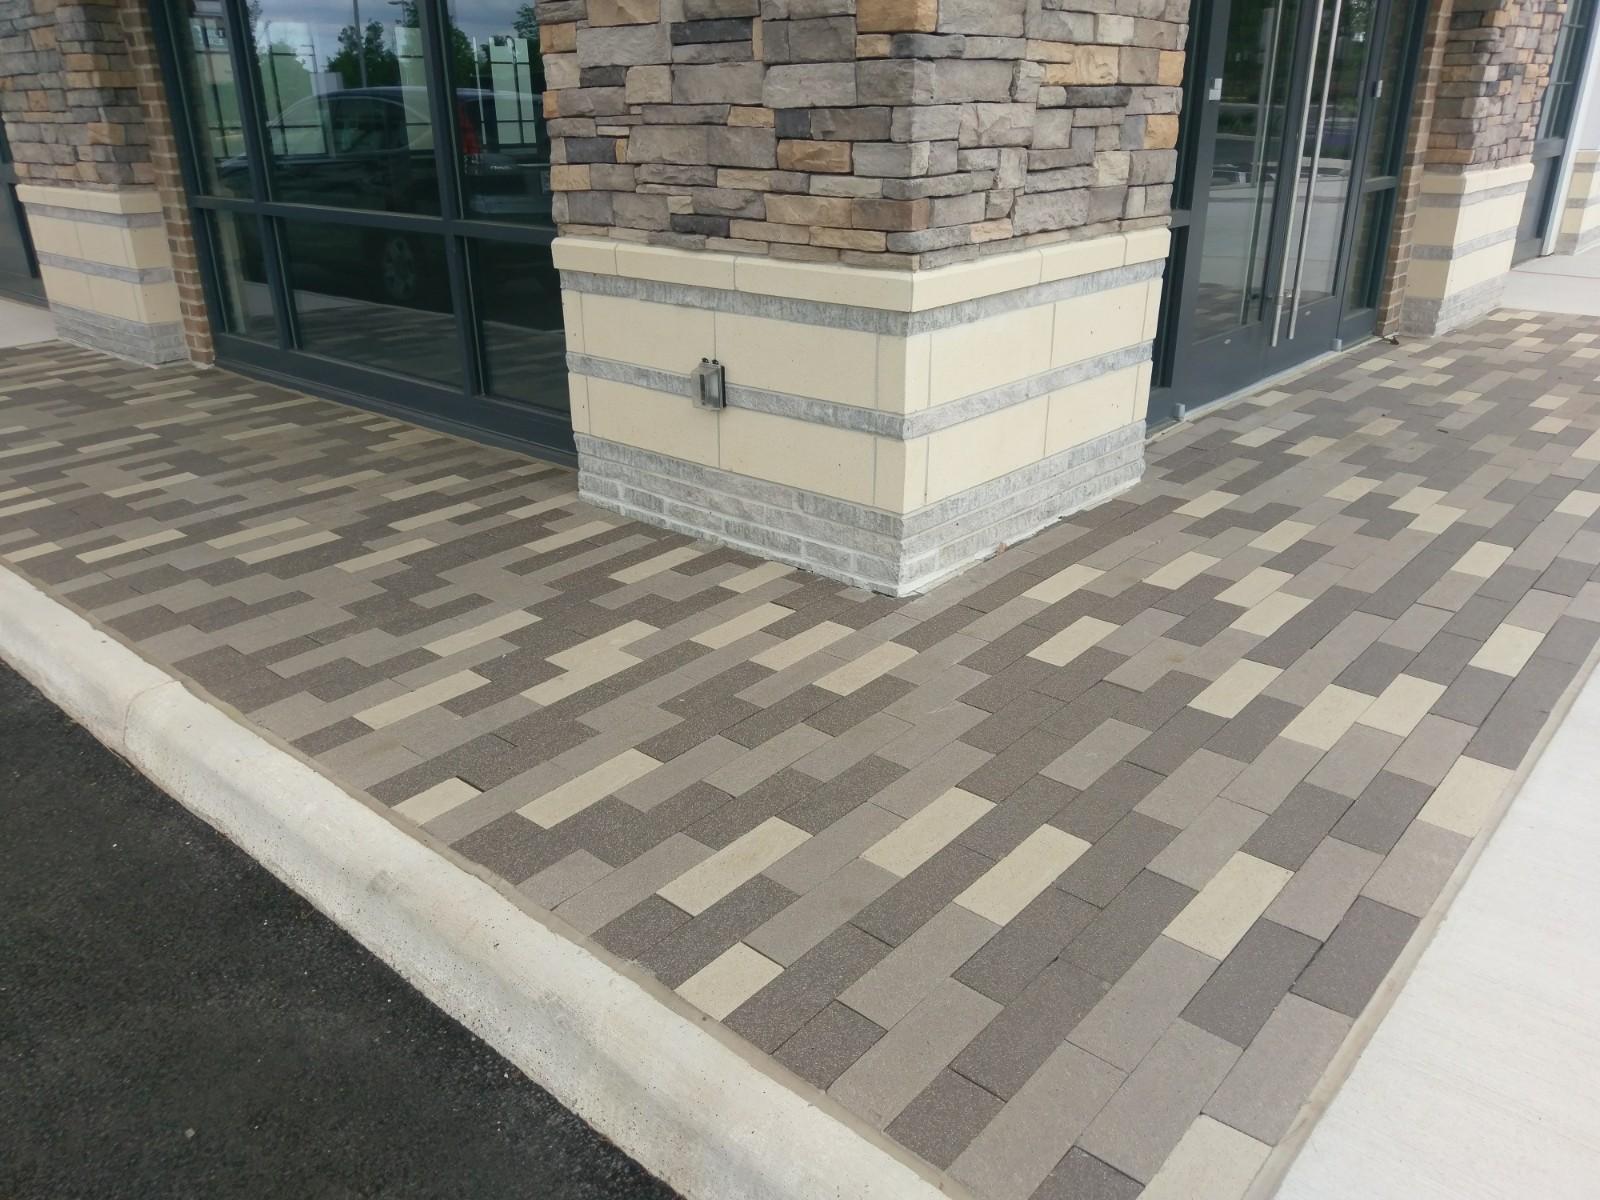 Brick walkway that features many hues of gray in the patterning